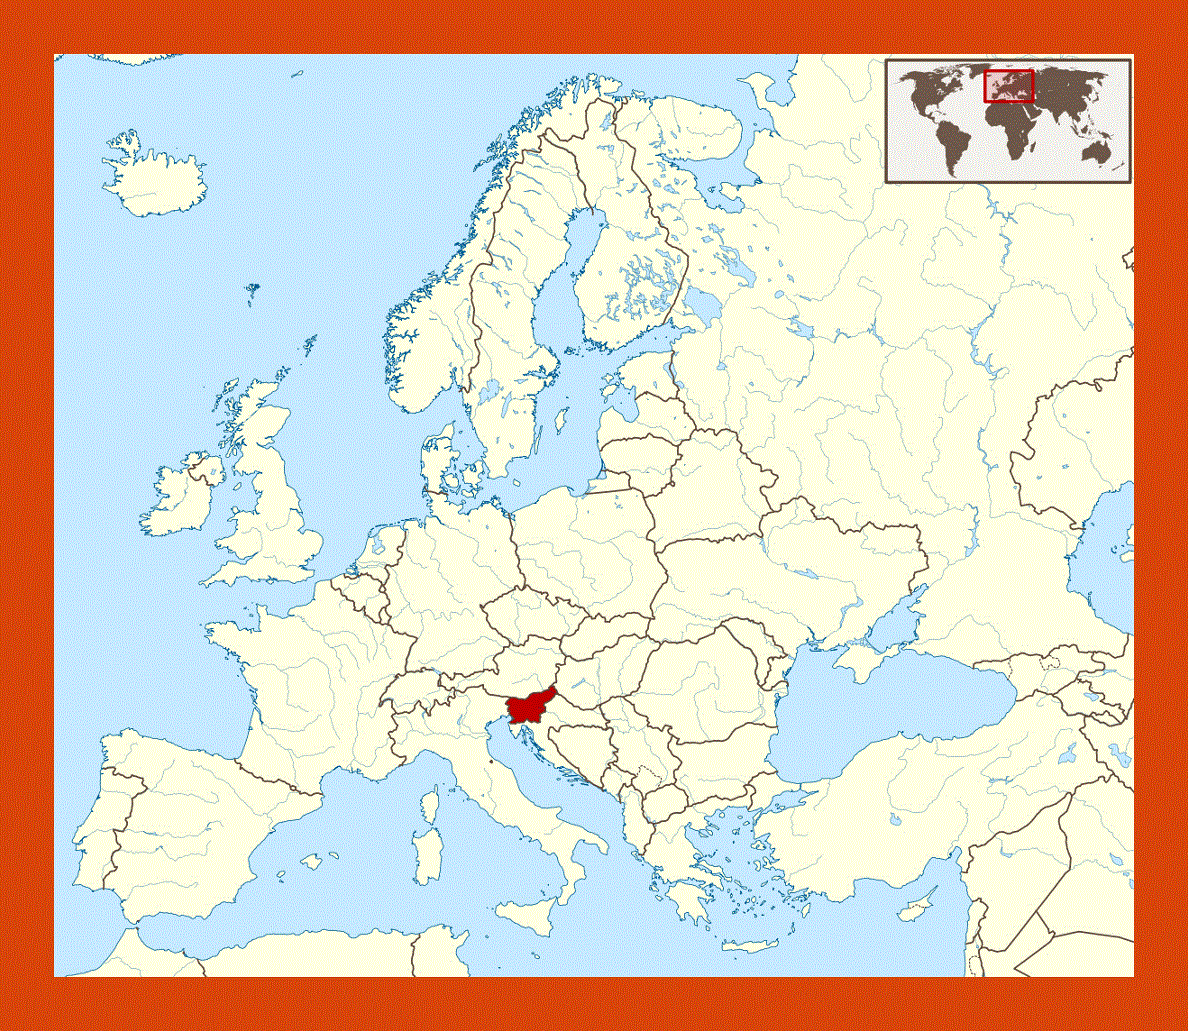 Location map of Slovenia in Europe